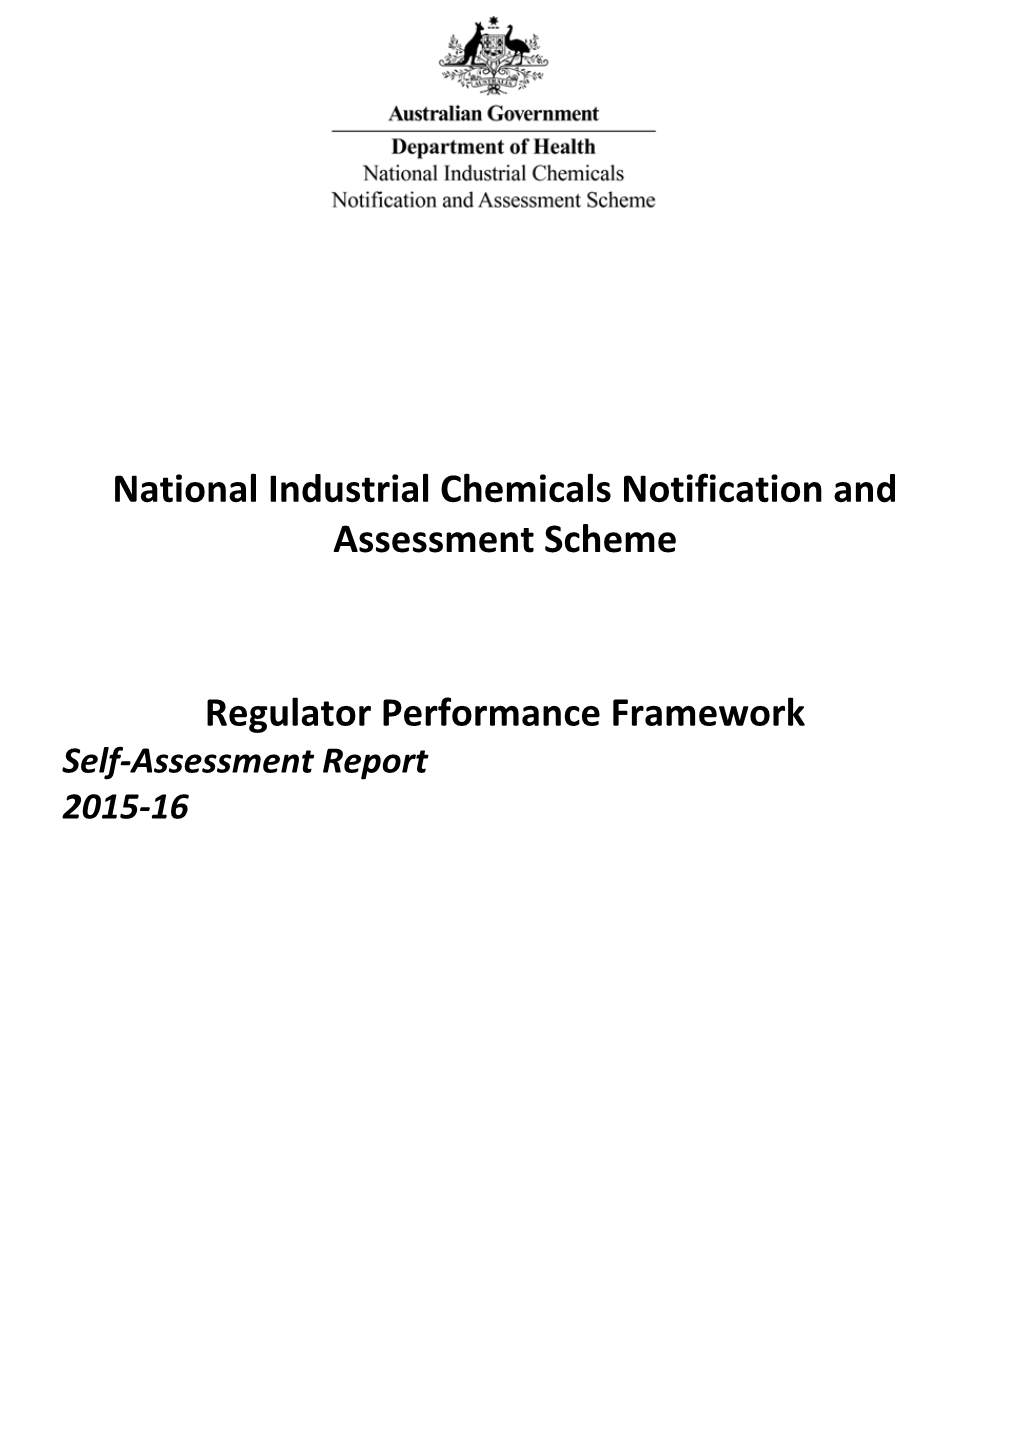 National Industrial Chemicals Notification and Assessment Scheme Self Assessment Report 2015-16